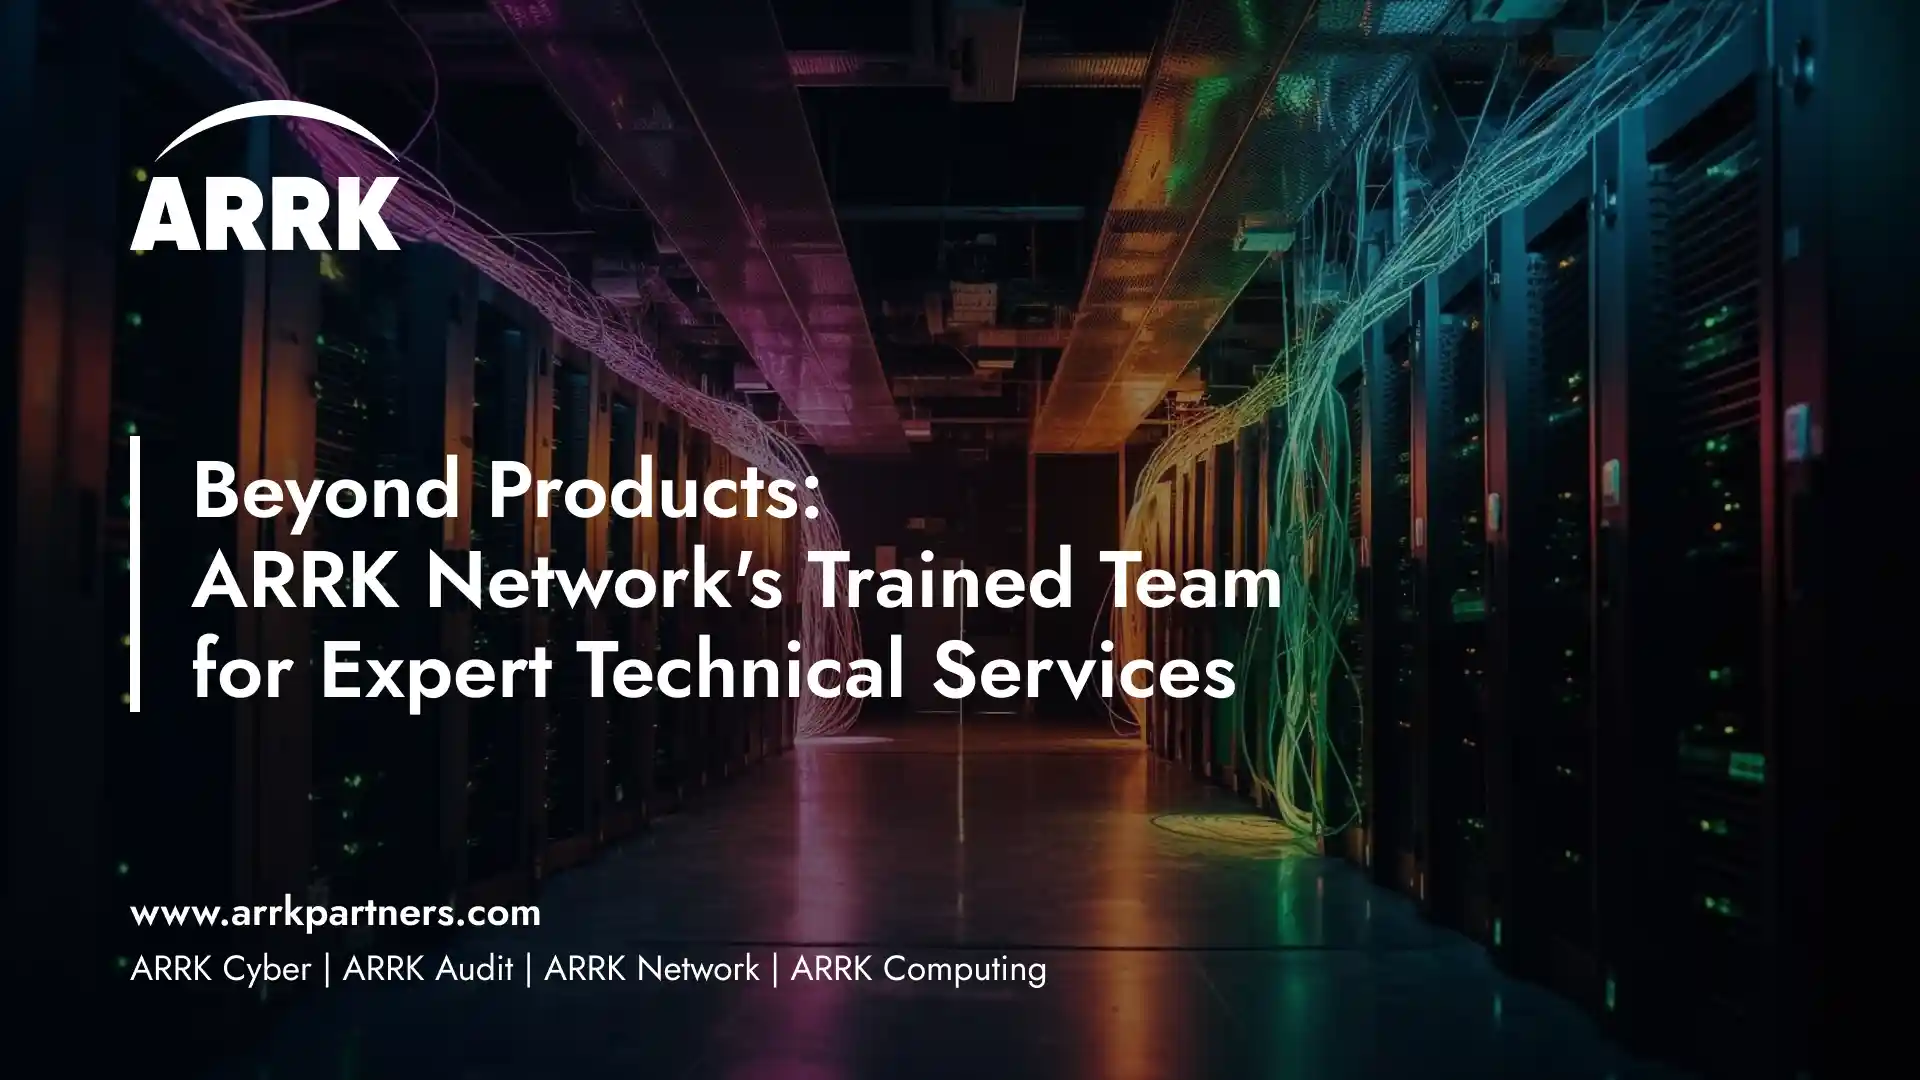 Beyond Products: ARRK Network's Trained Team for Expert Technical Services